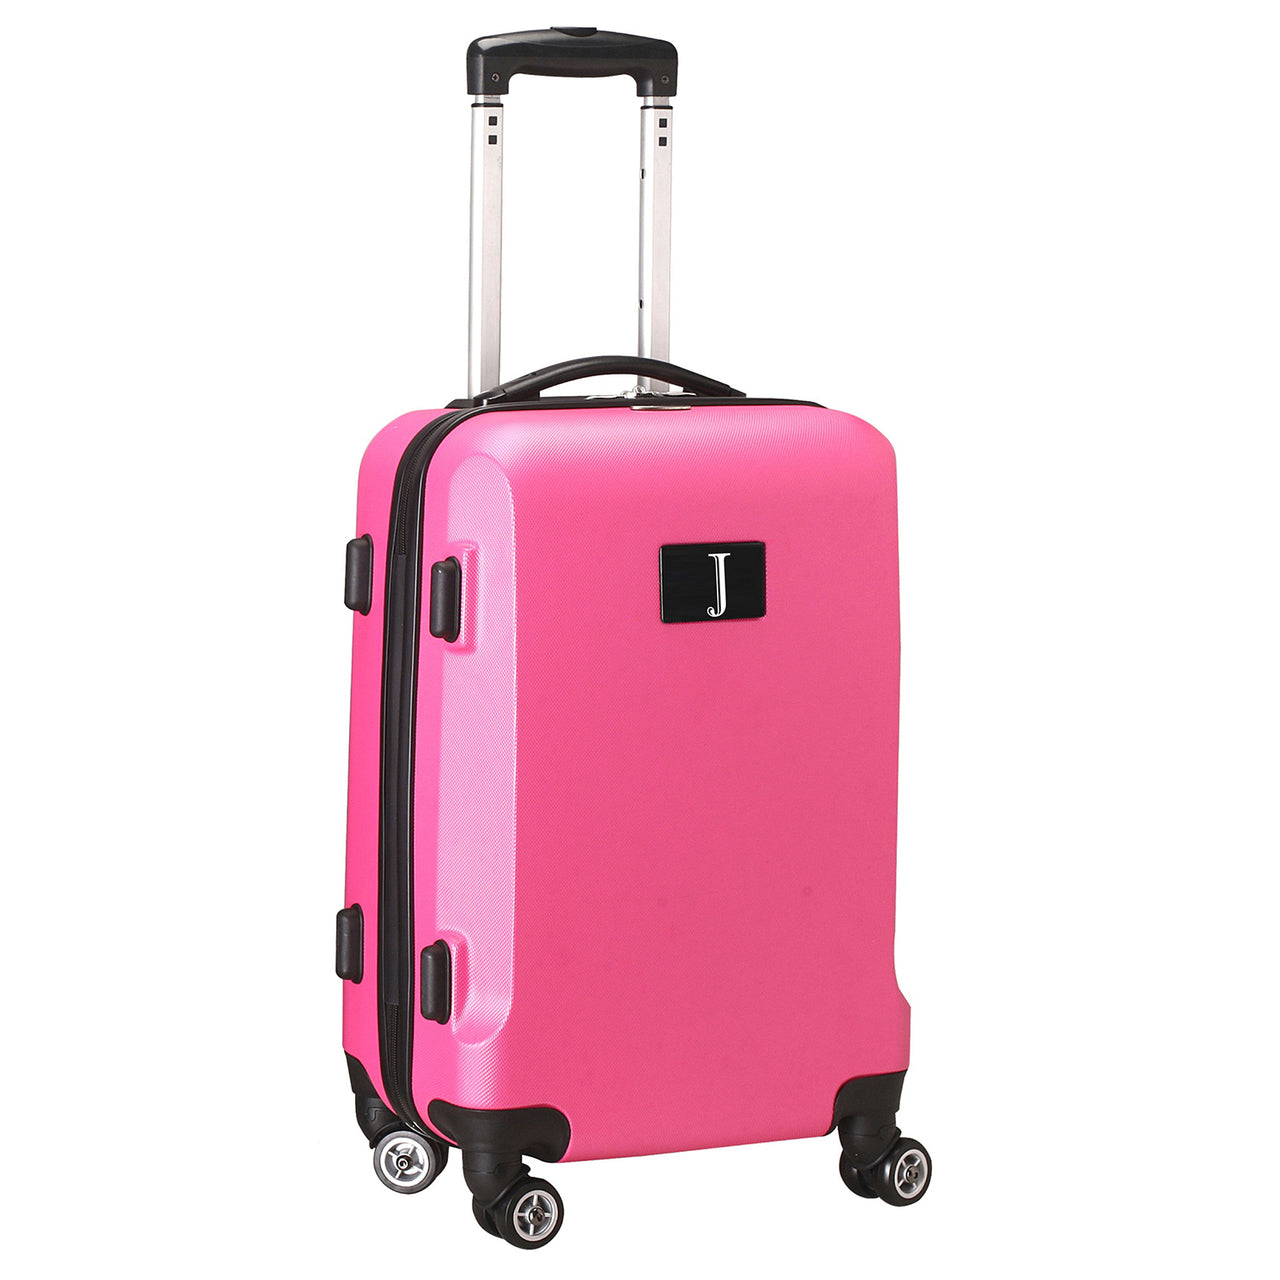 Personalized Initial Name letter "J" 20 inches Carry on Hardcase Spinner Luggage by Mojo in PINK